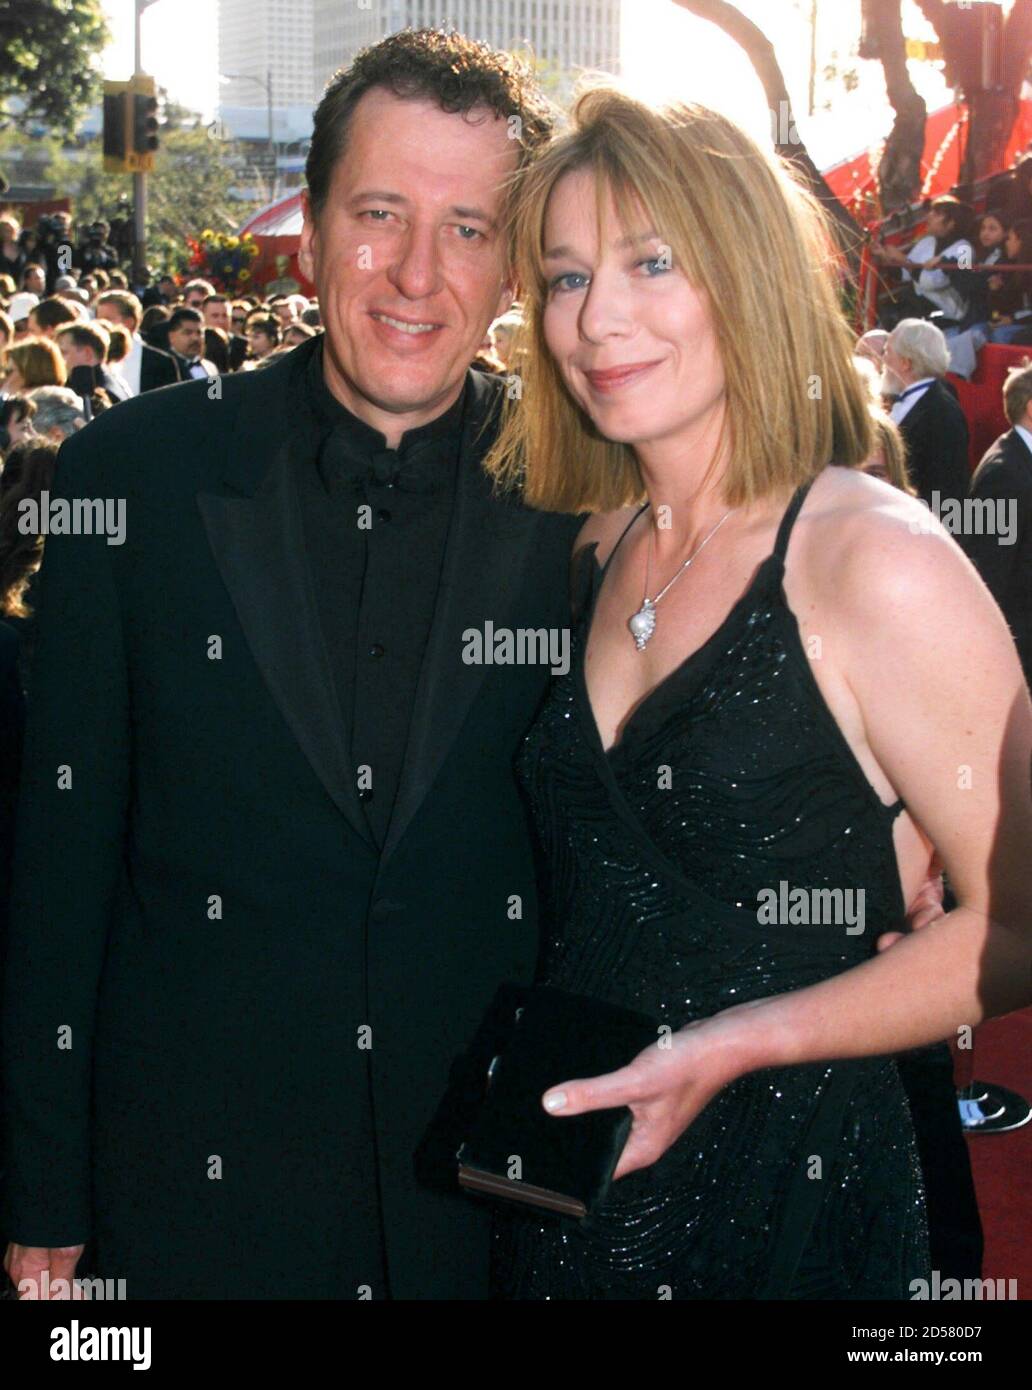 supporting Actor Nominee Geoffrey Rush And His Wife Jane Menelaus Arrive At The 71st Annual Academy Awards At The Dorothy Chandler Pavilion In Los Angeles March 21 Rush Is Nominated For His